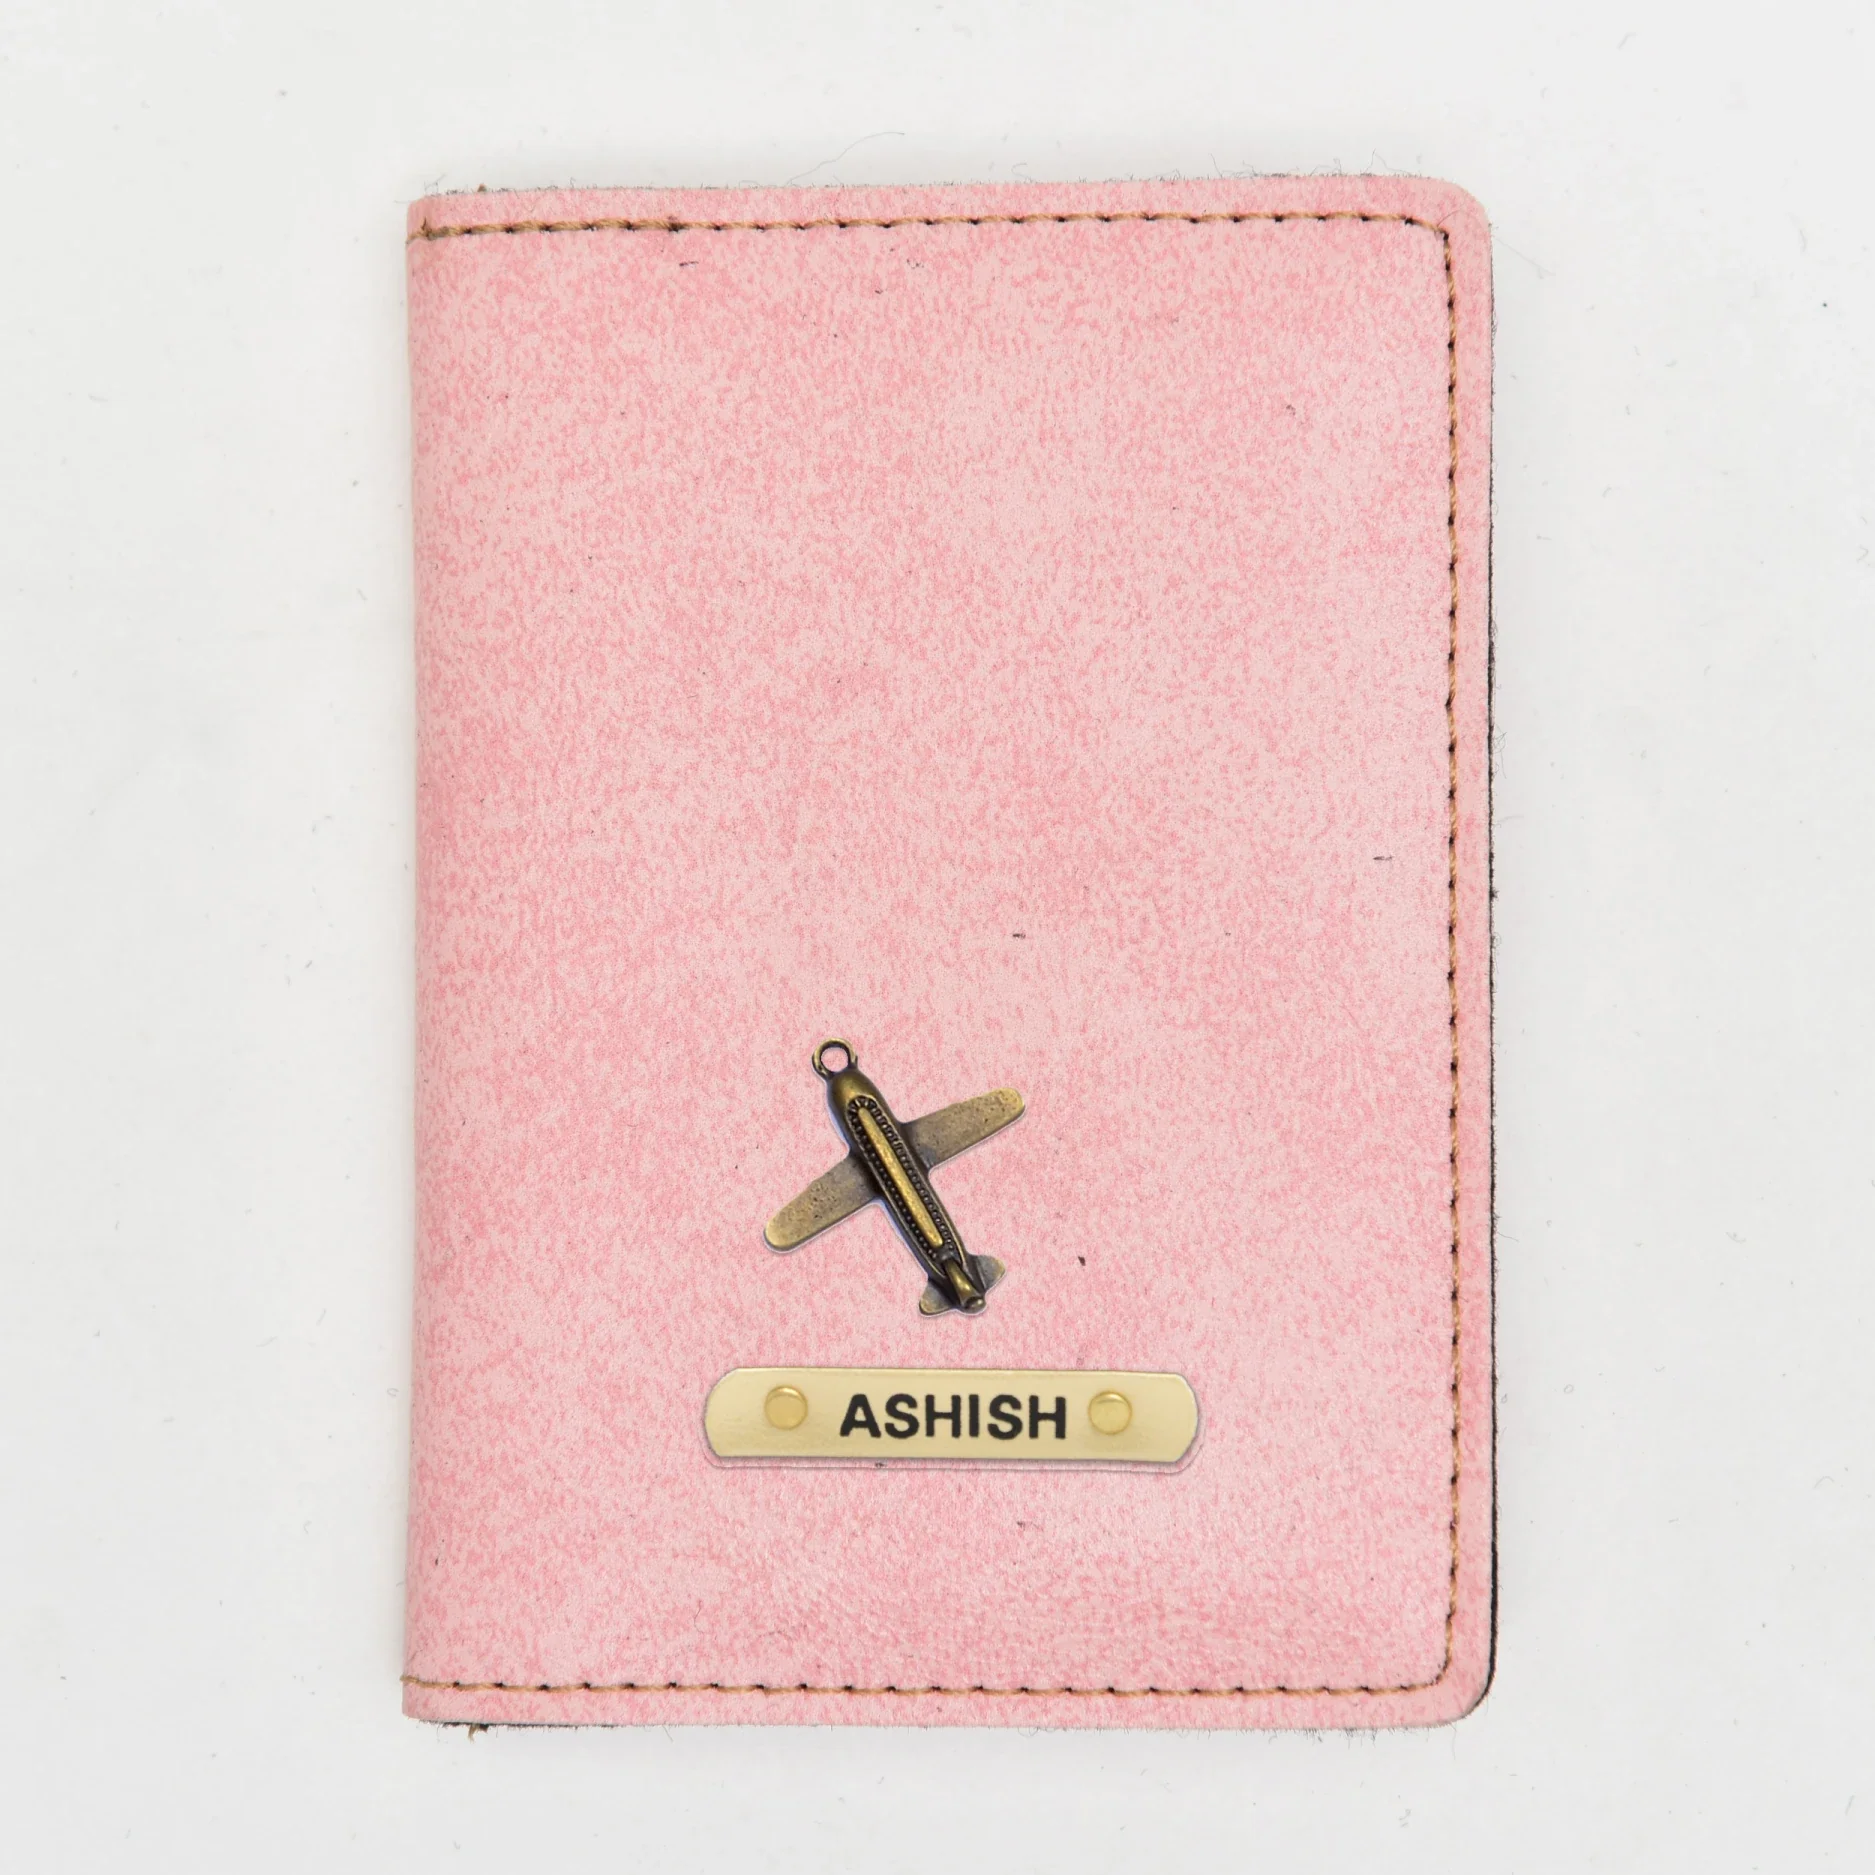 Carry your travel documents in impeccable style with a personalized leather passport case that radiates class.